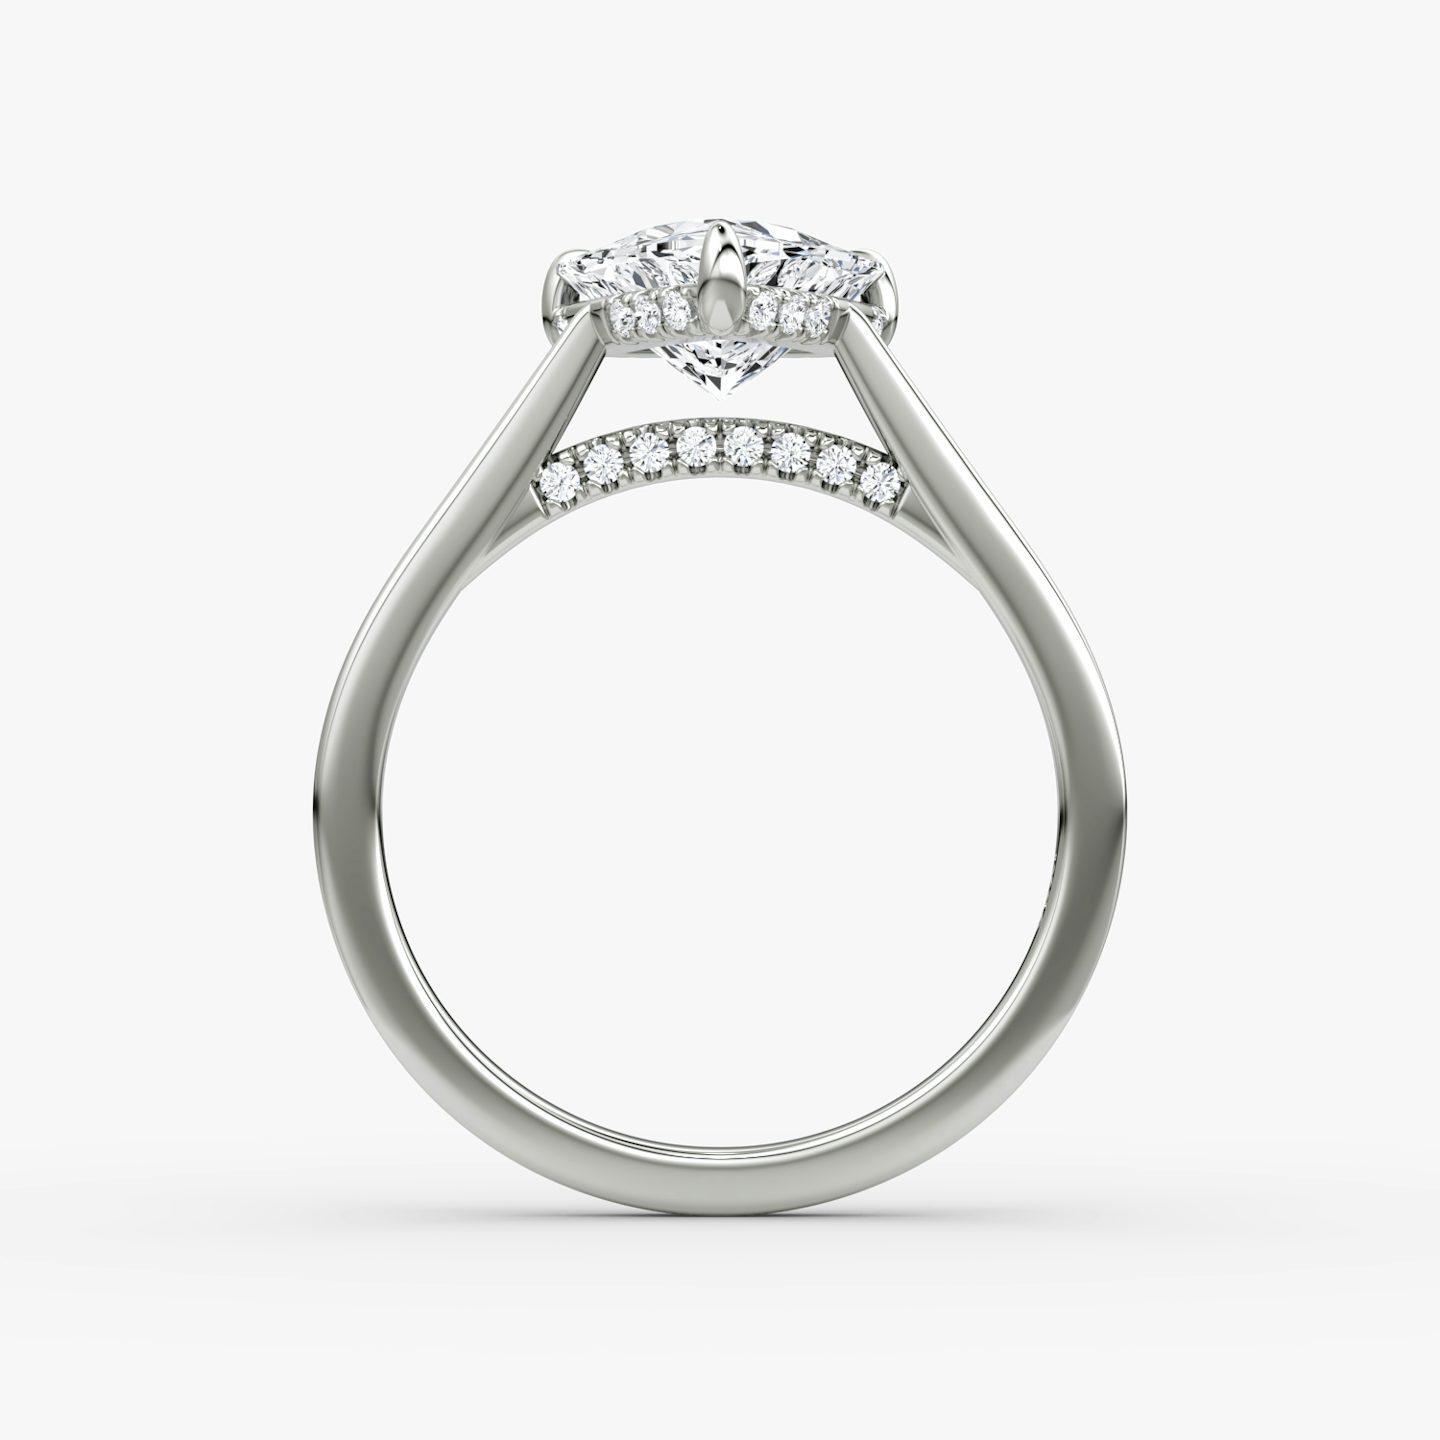 undefined | Trillion | 18k | Or blanc | bandAccent: Simple | diamondOrientation: vertical | caratWeight: other